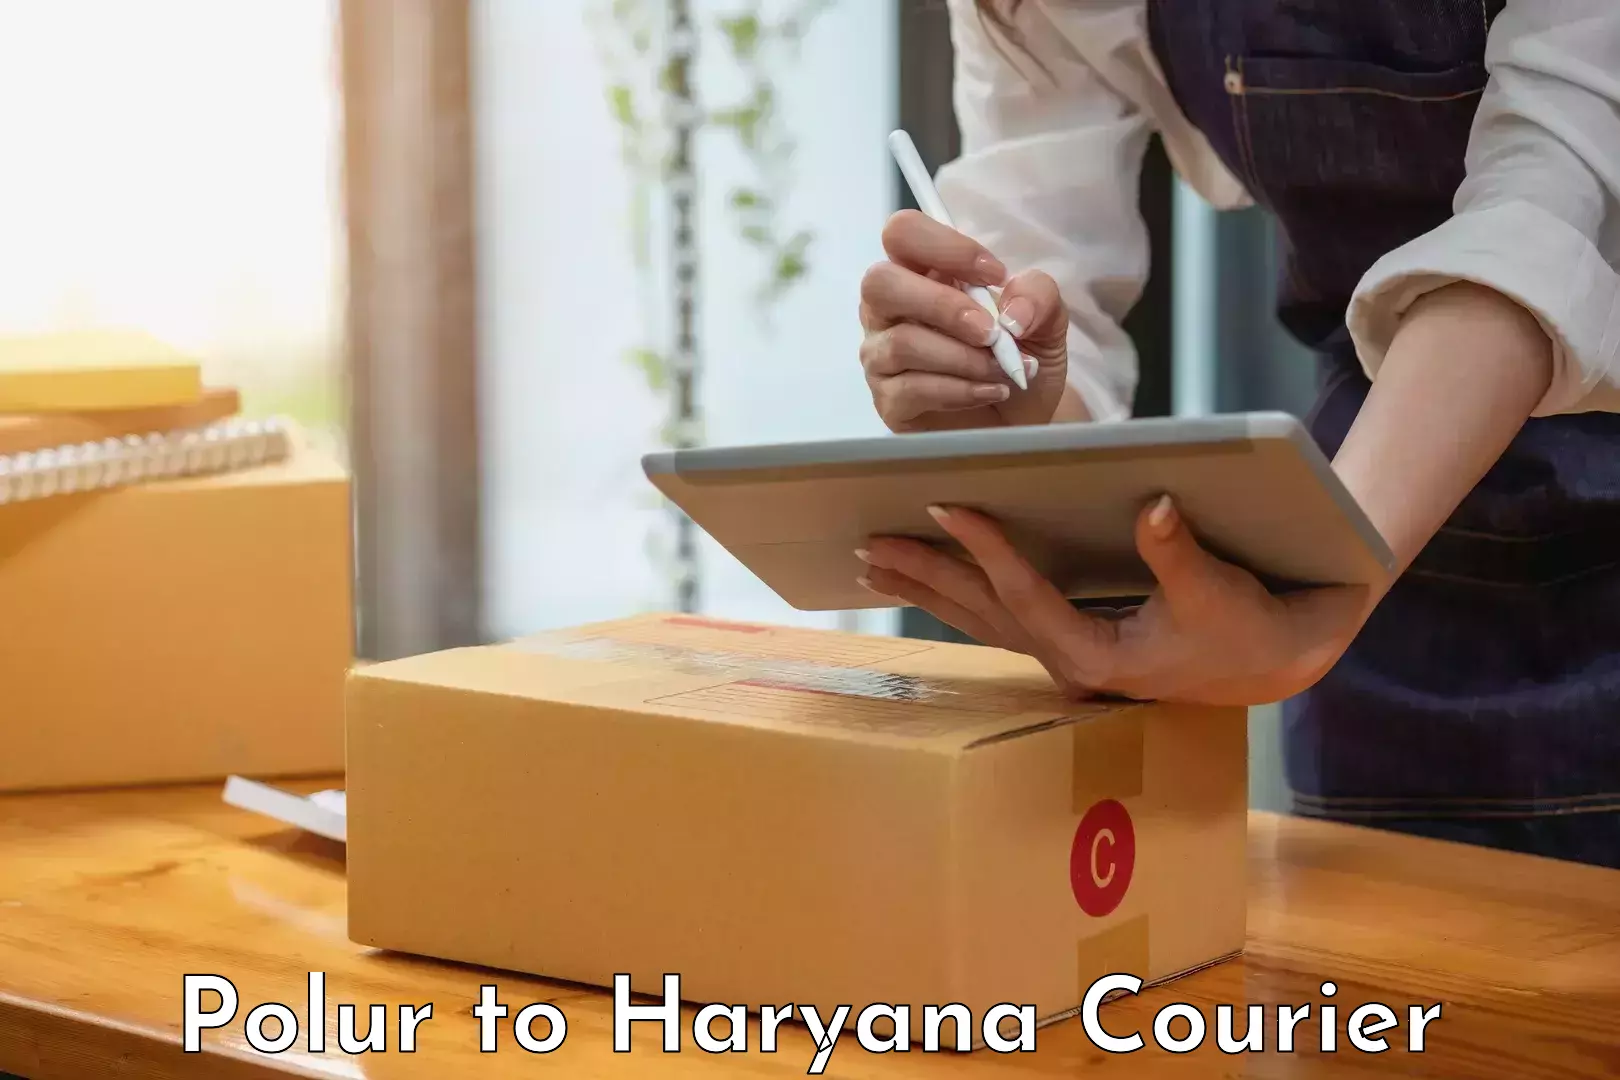 Multi-national courier services Polur to Chaudhary Charan Singh Haryana Agricultural University Hisar